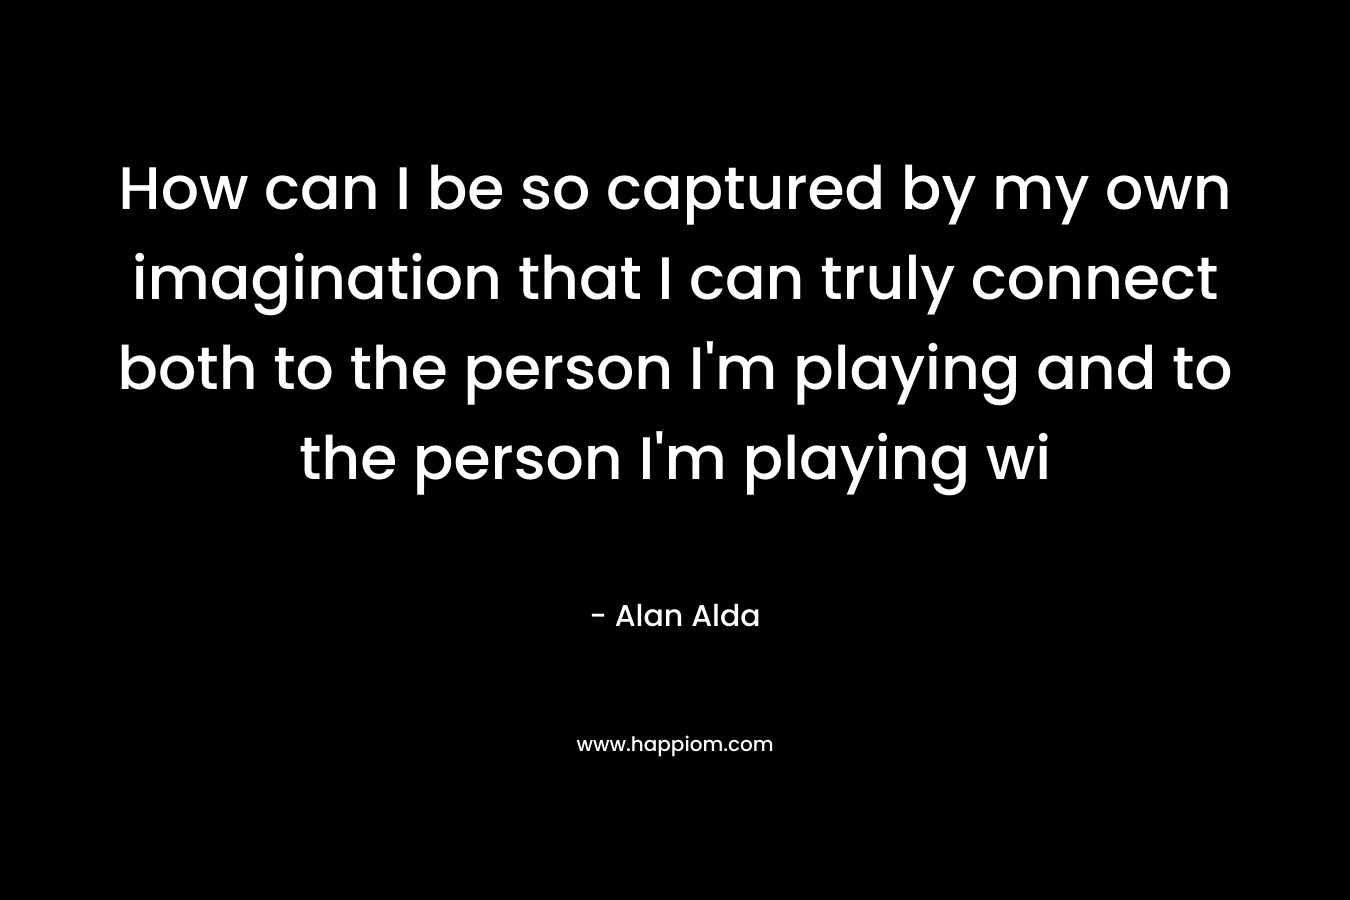 How can I be so captured by my own imagination that I can truly connect both to the person I’m playing and to the person I’m playing wi – Alan Alda